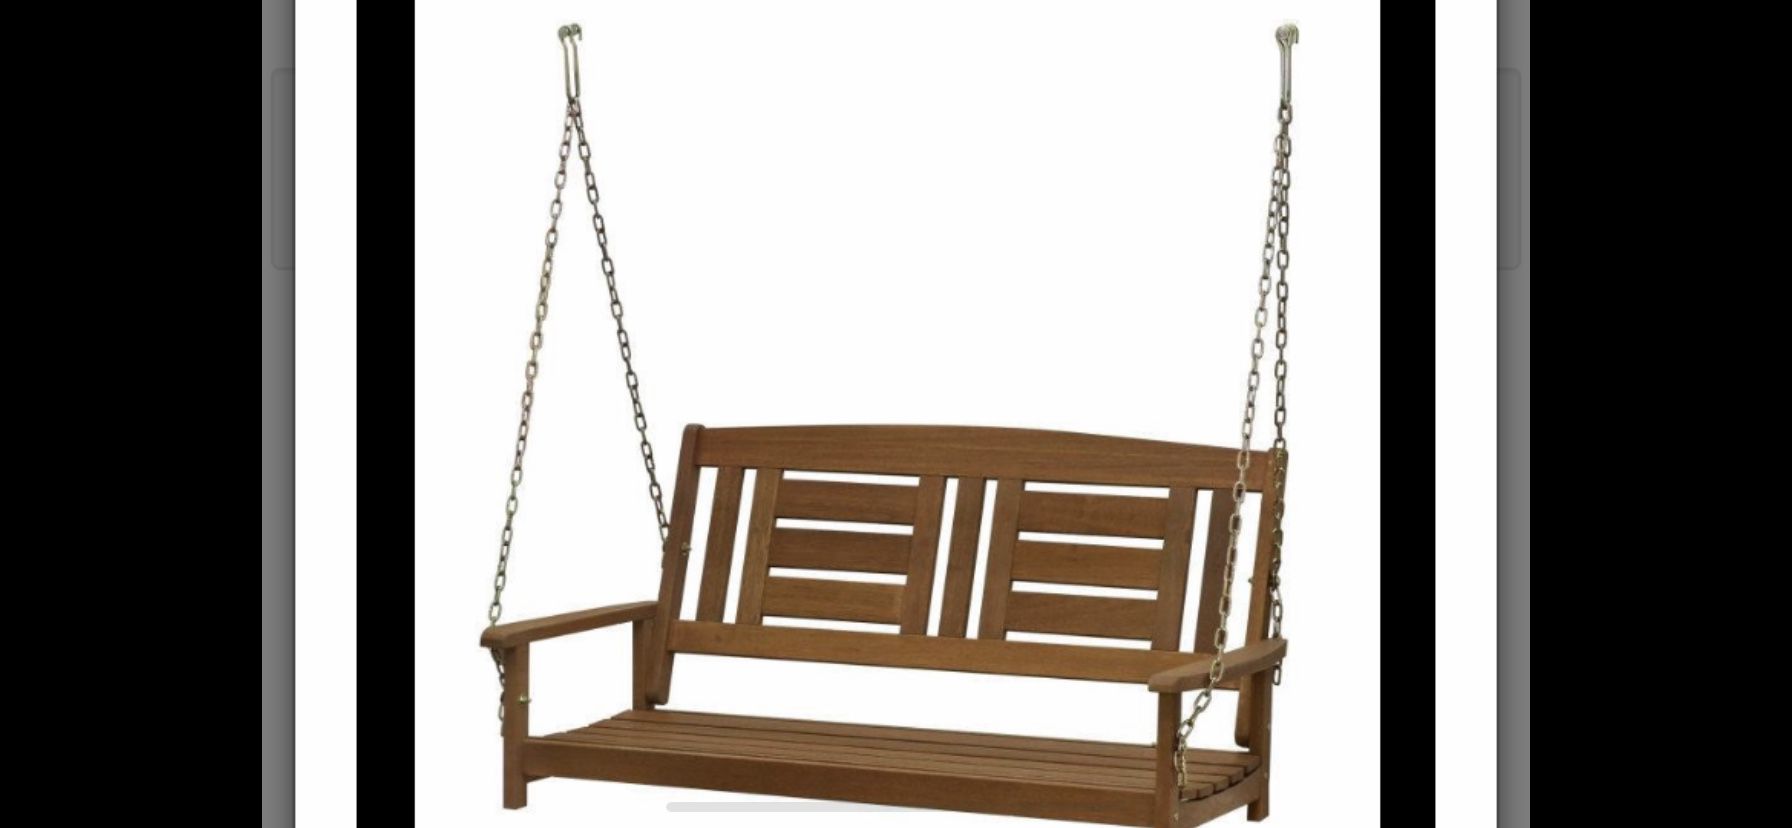 NEW- Sunnydaze Deluxe 2-Person Wooden Patio Swing for Outdoor Porch, Backyard or Deck --RETAIL $253. Asking $150.00 obo